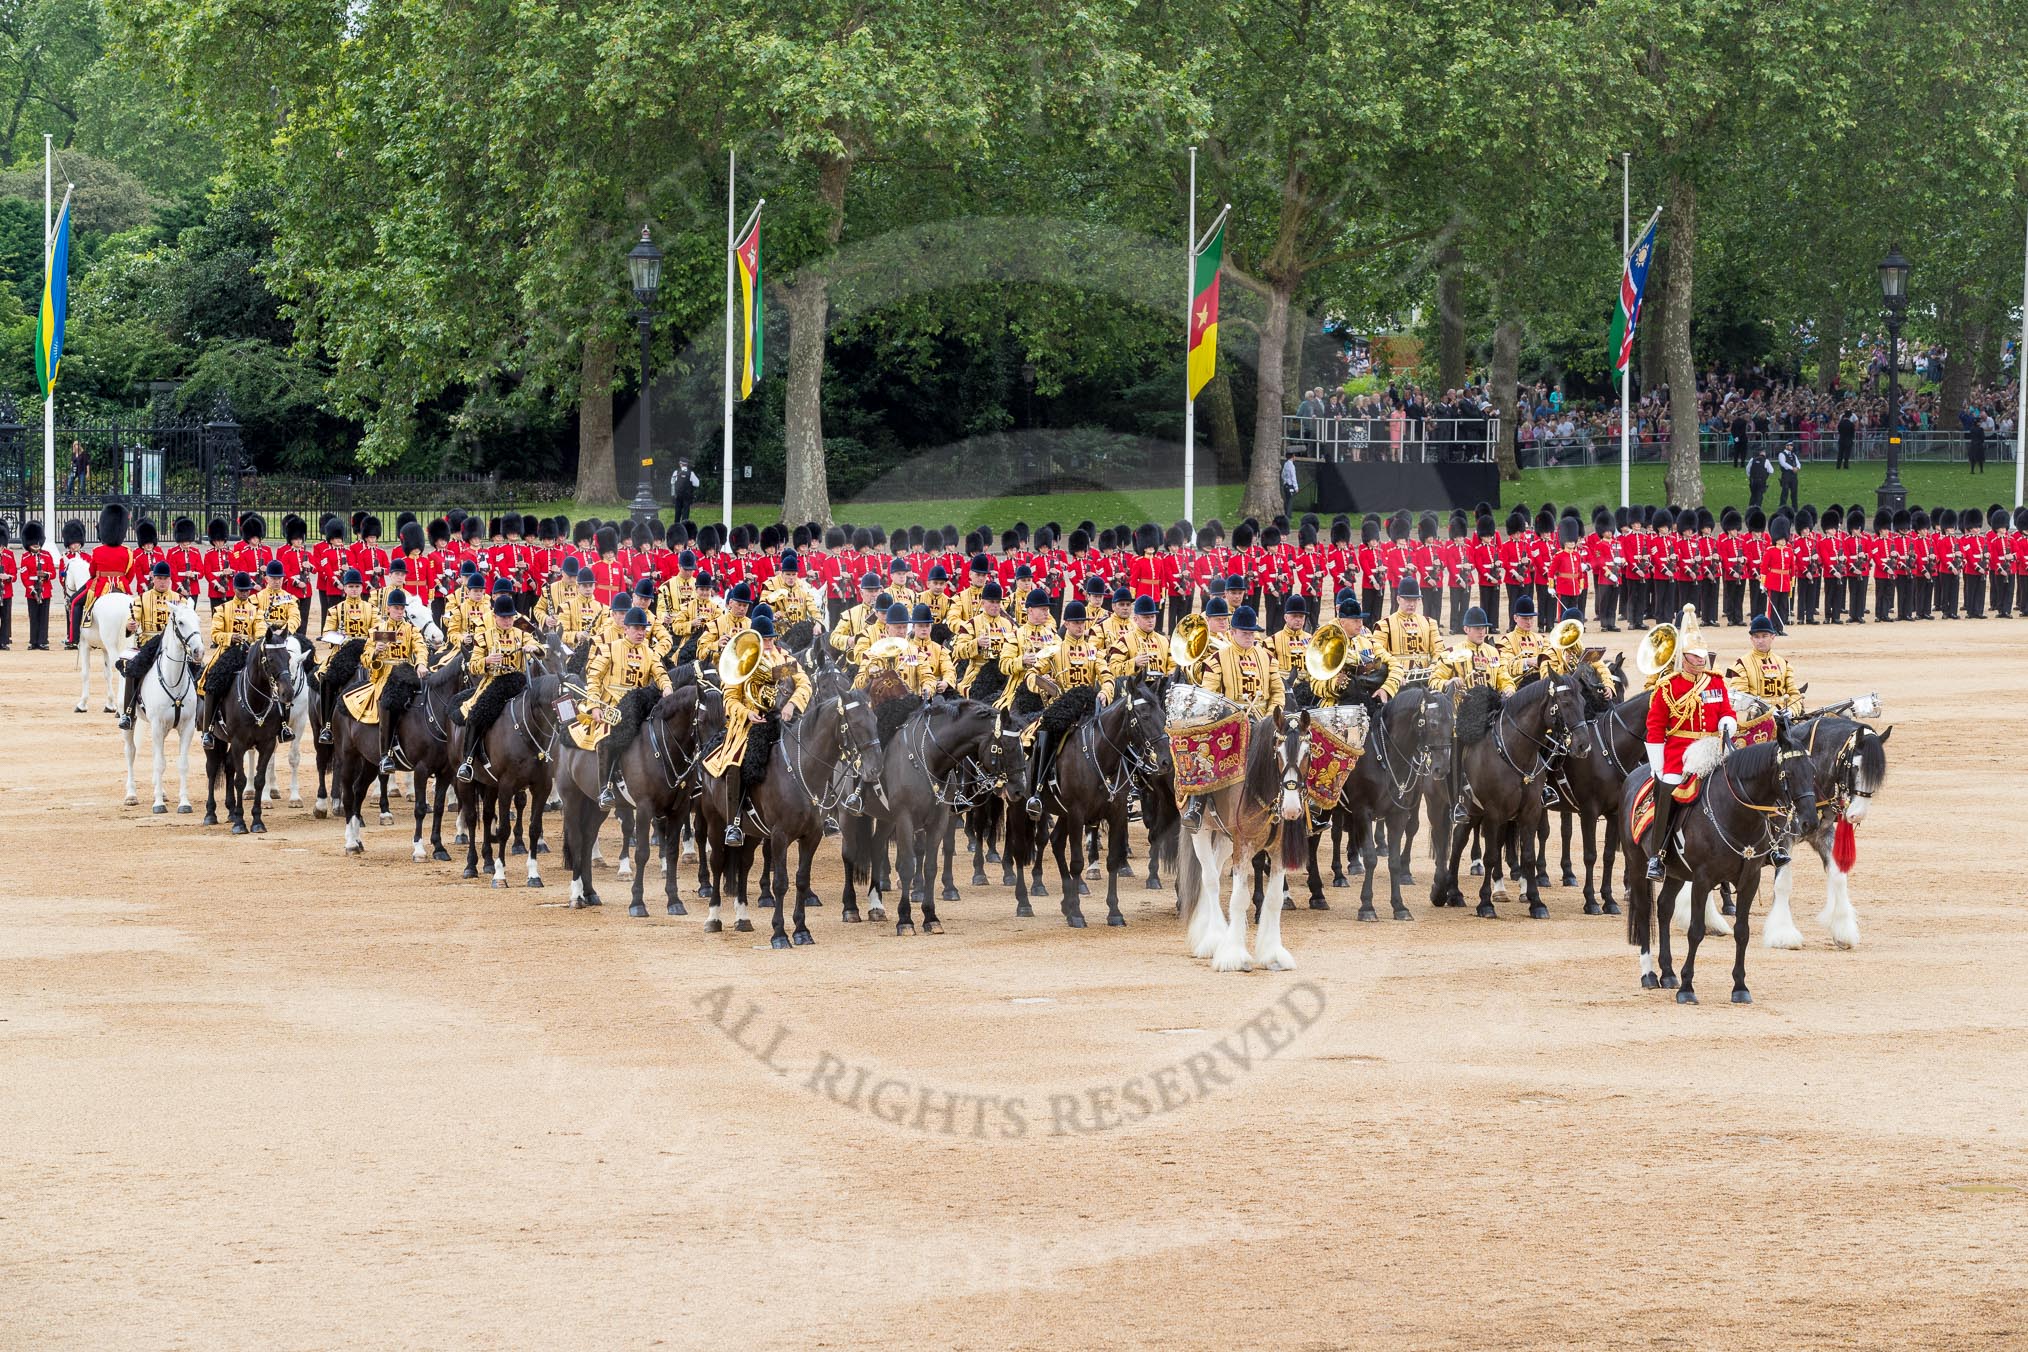 Trooping the Colour 2016.
Horse Guards Parade, Westminster,
London SW1A,
London,
United Kingdom,
on 11 June 2016 at 12:02, image #831